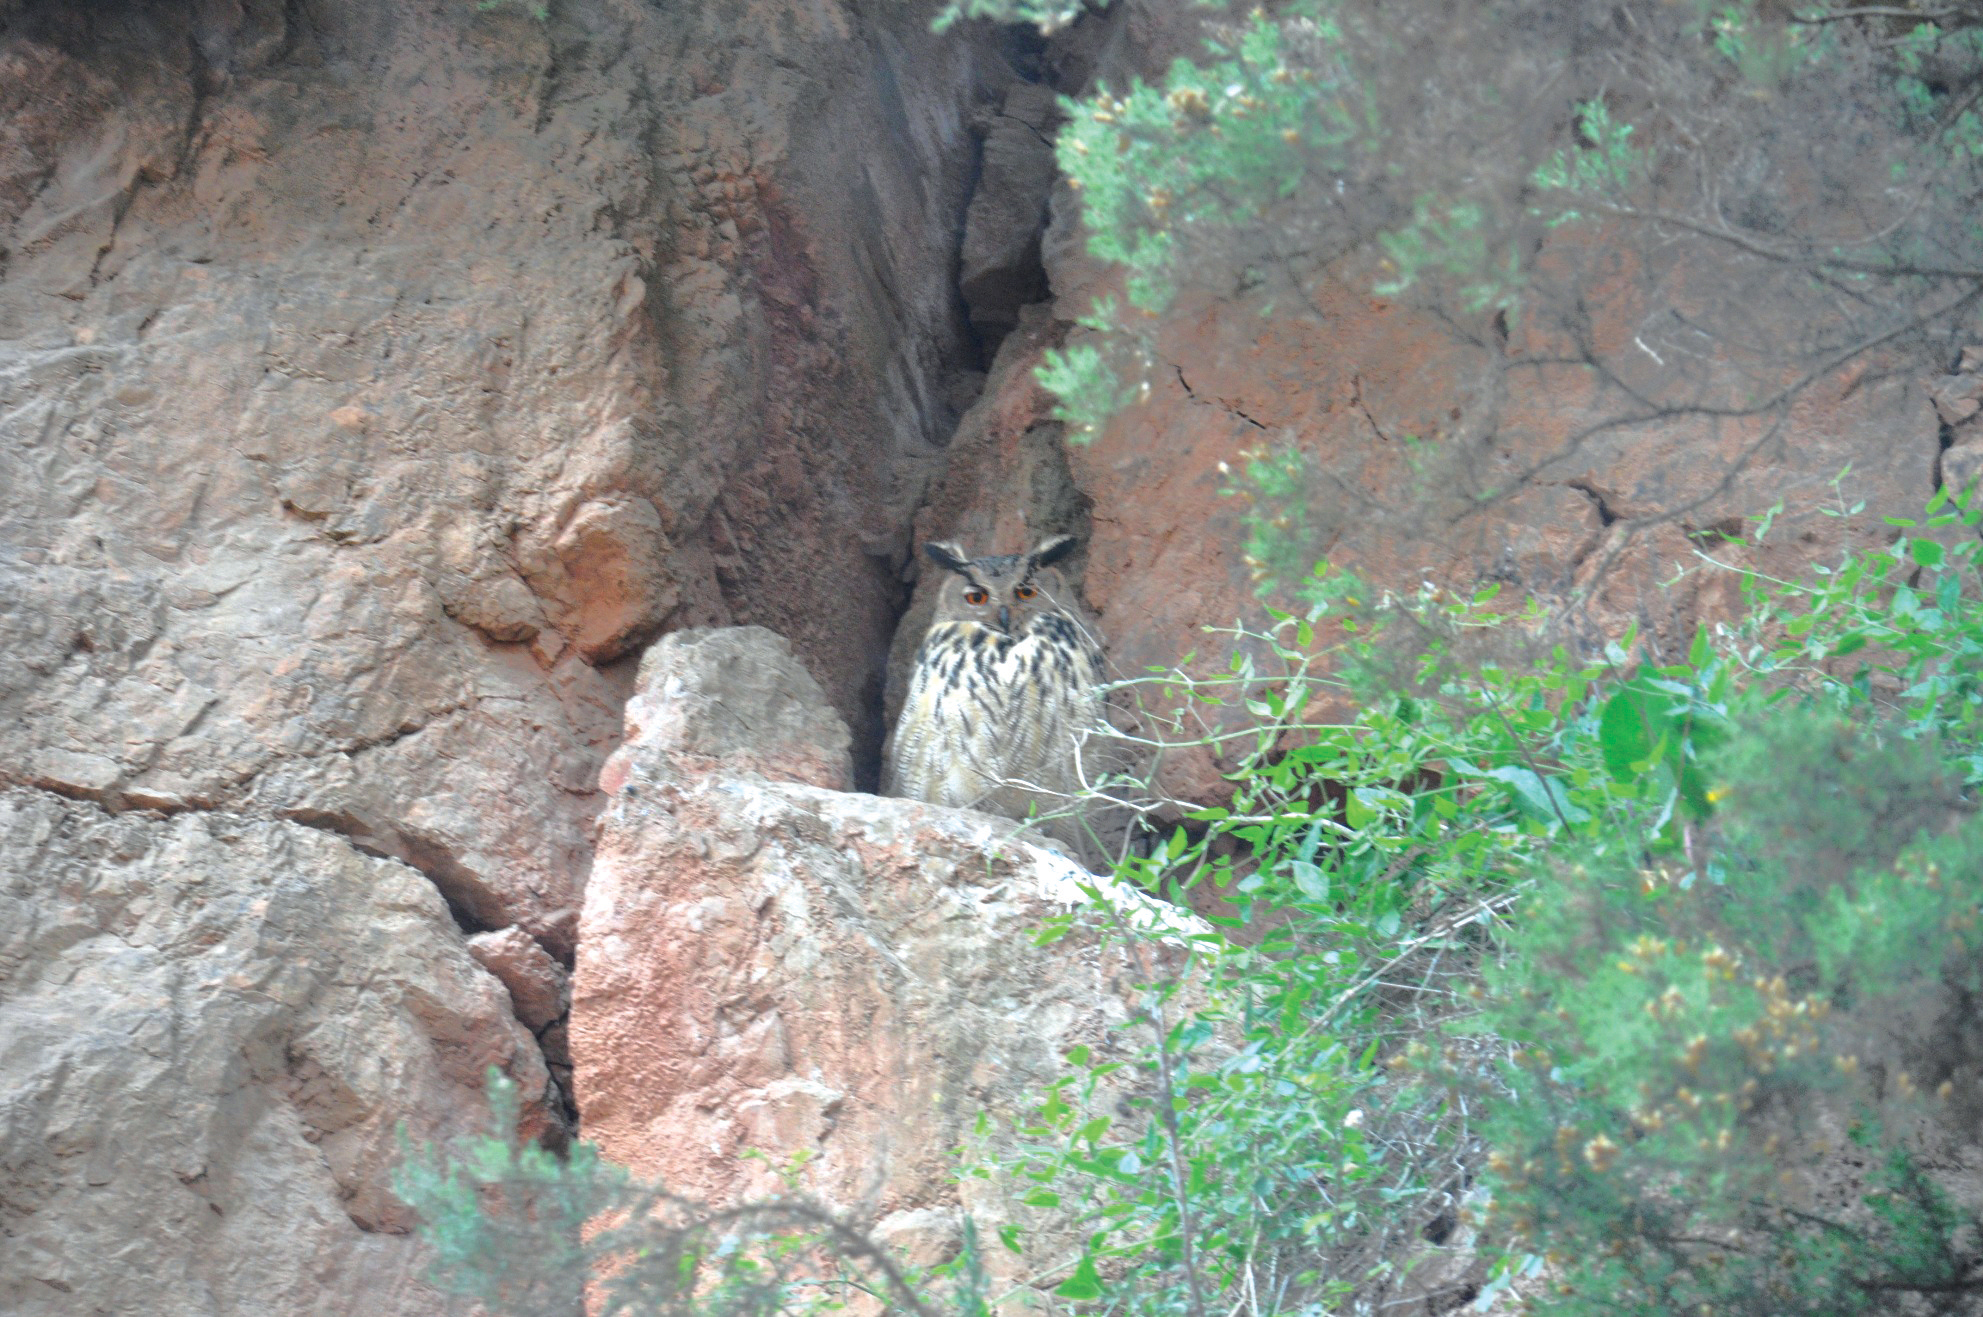 Owl at Tarmac Stowfield Quarry